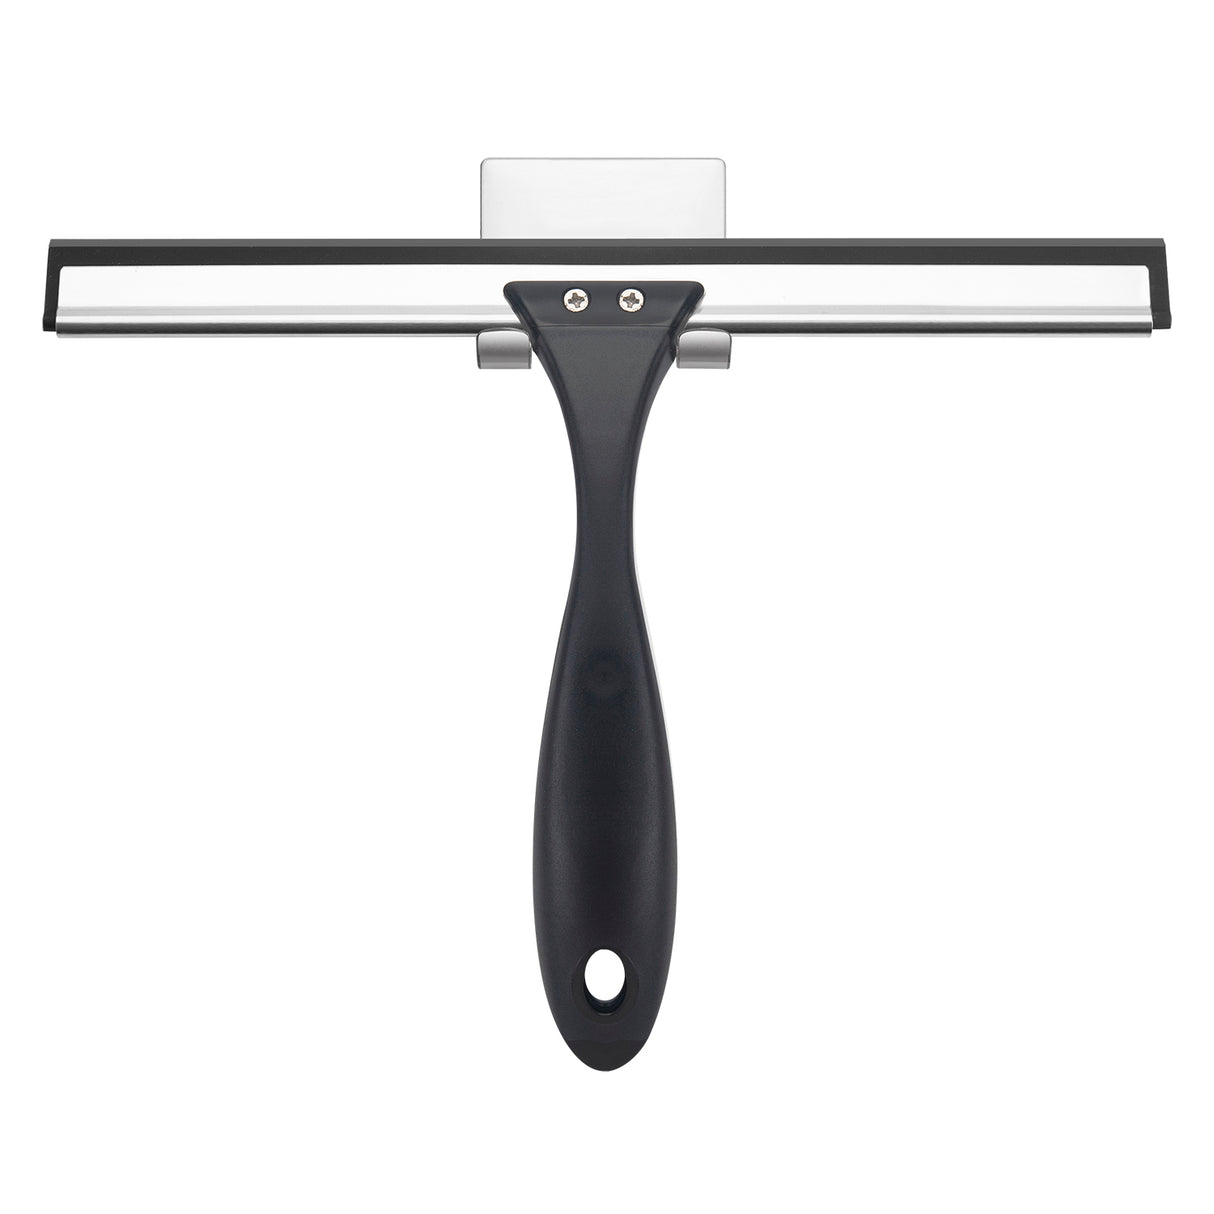 Shower Squeegee with Hook Water Scraper for Smooth Surfaces Black 